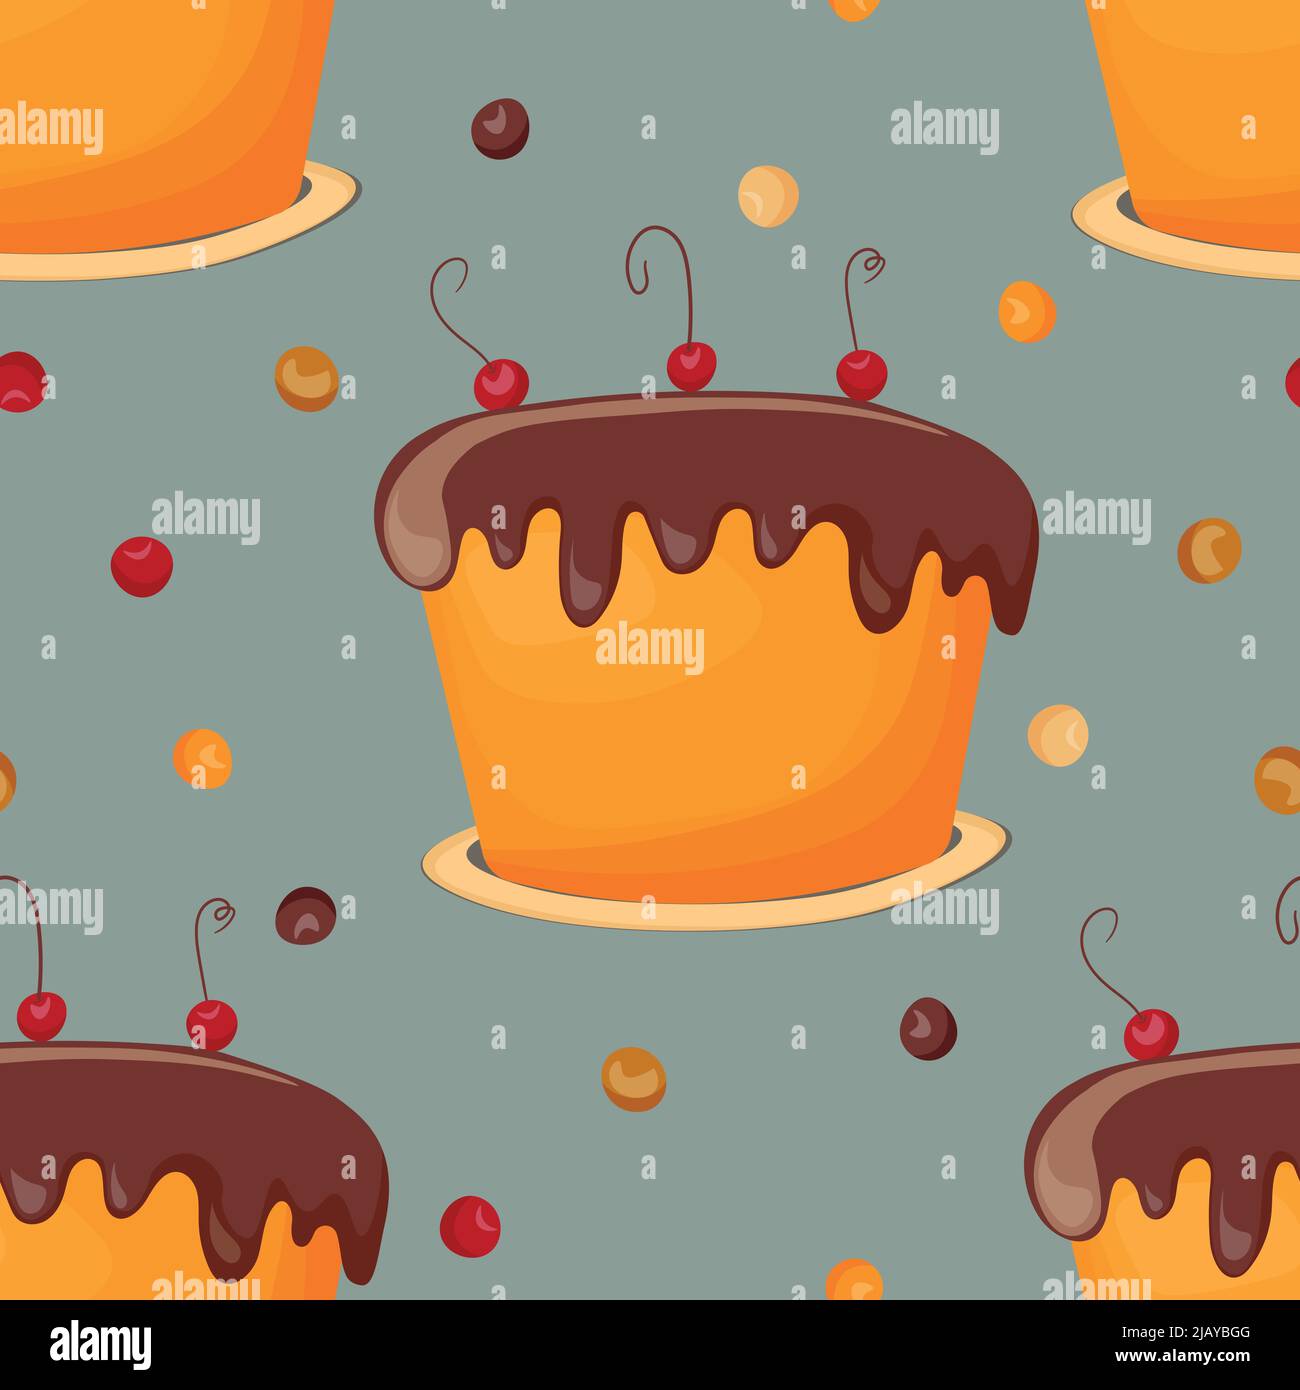 Holiday cooking seamless pattern. Cupcake, cake, sweet pastry, cupcake with colored icing and colorful details. Food concept. Realistic vector Stock Vector